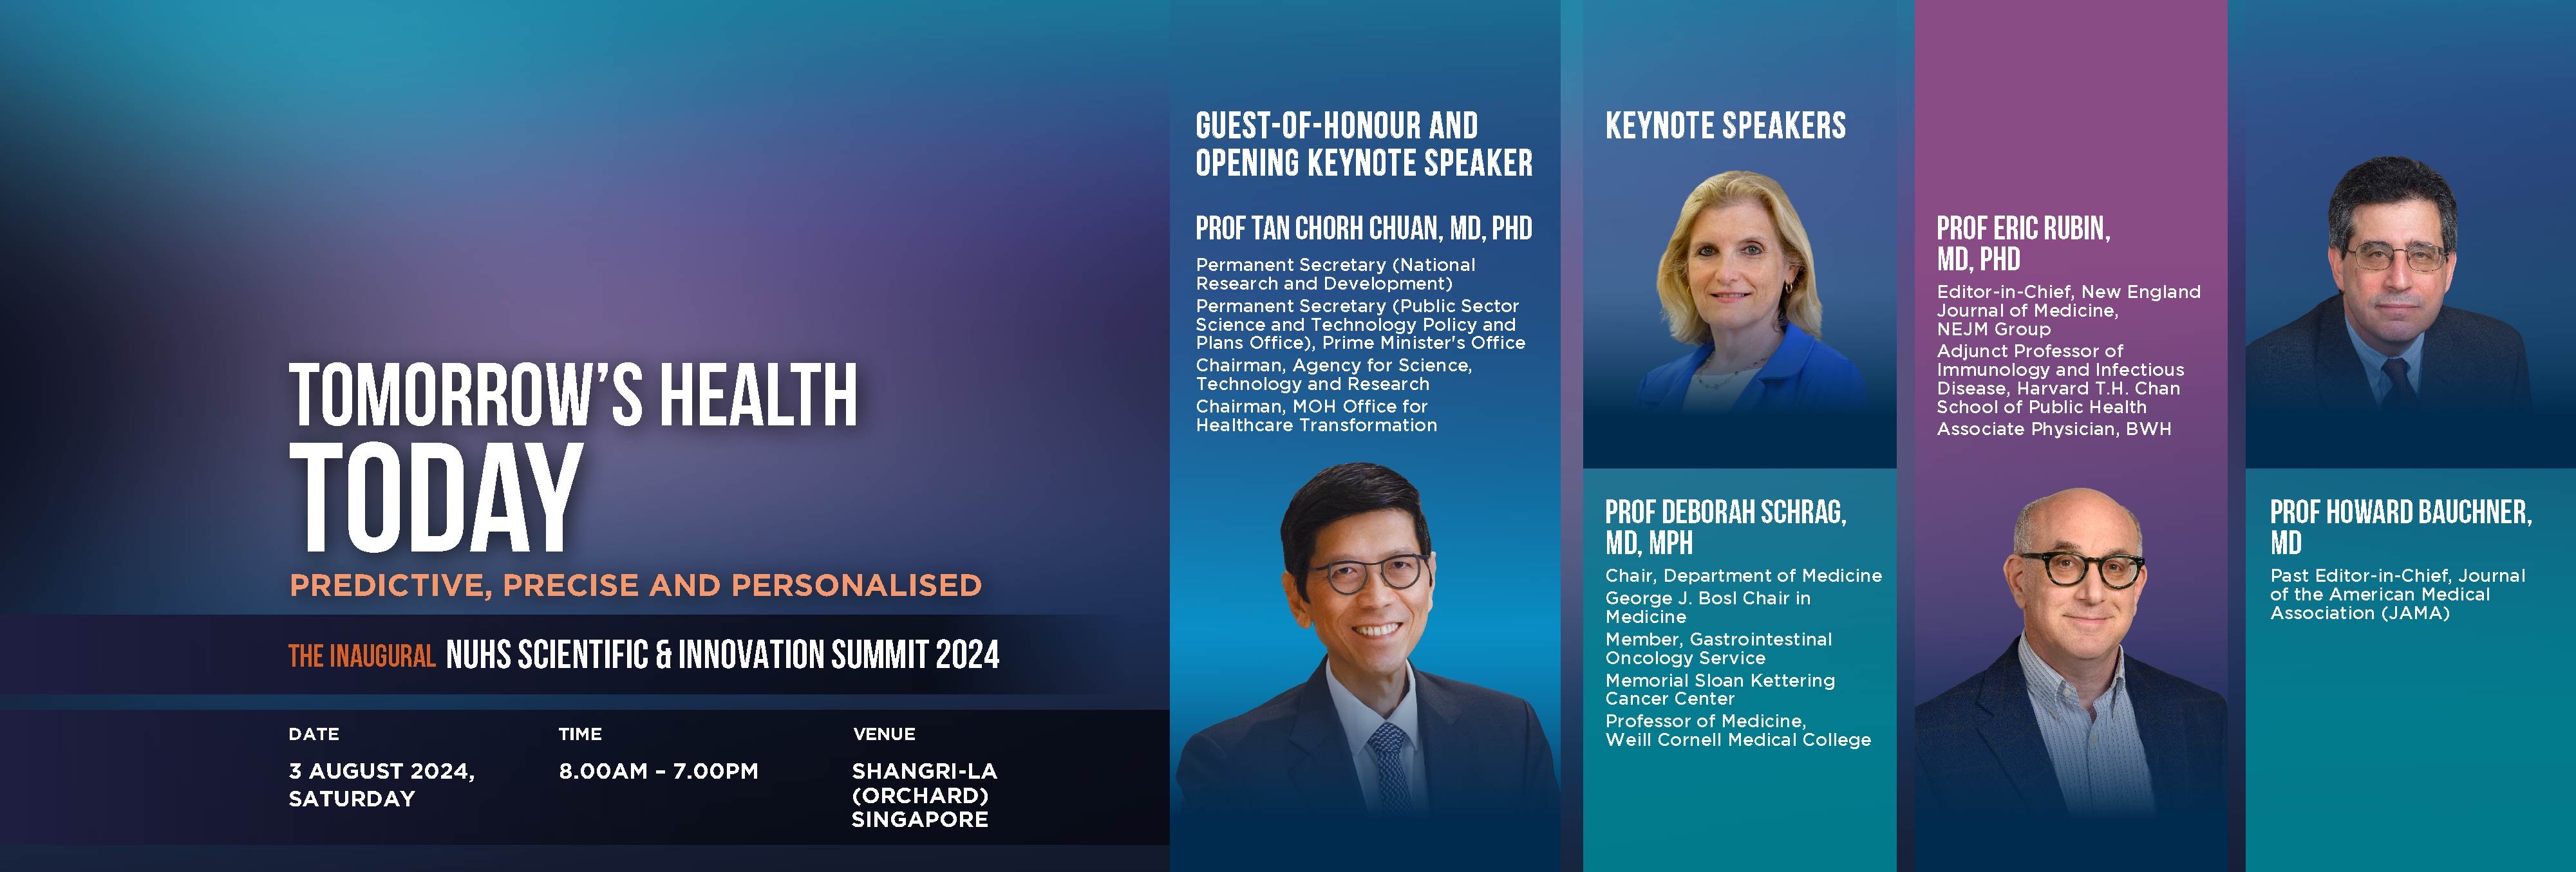 NUHS Scientific and Innovation Summit 2024 - Featuring the Keynote Speakers